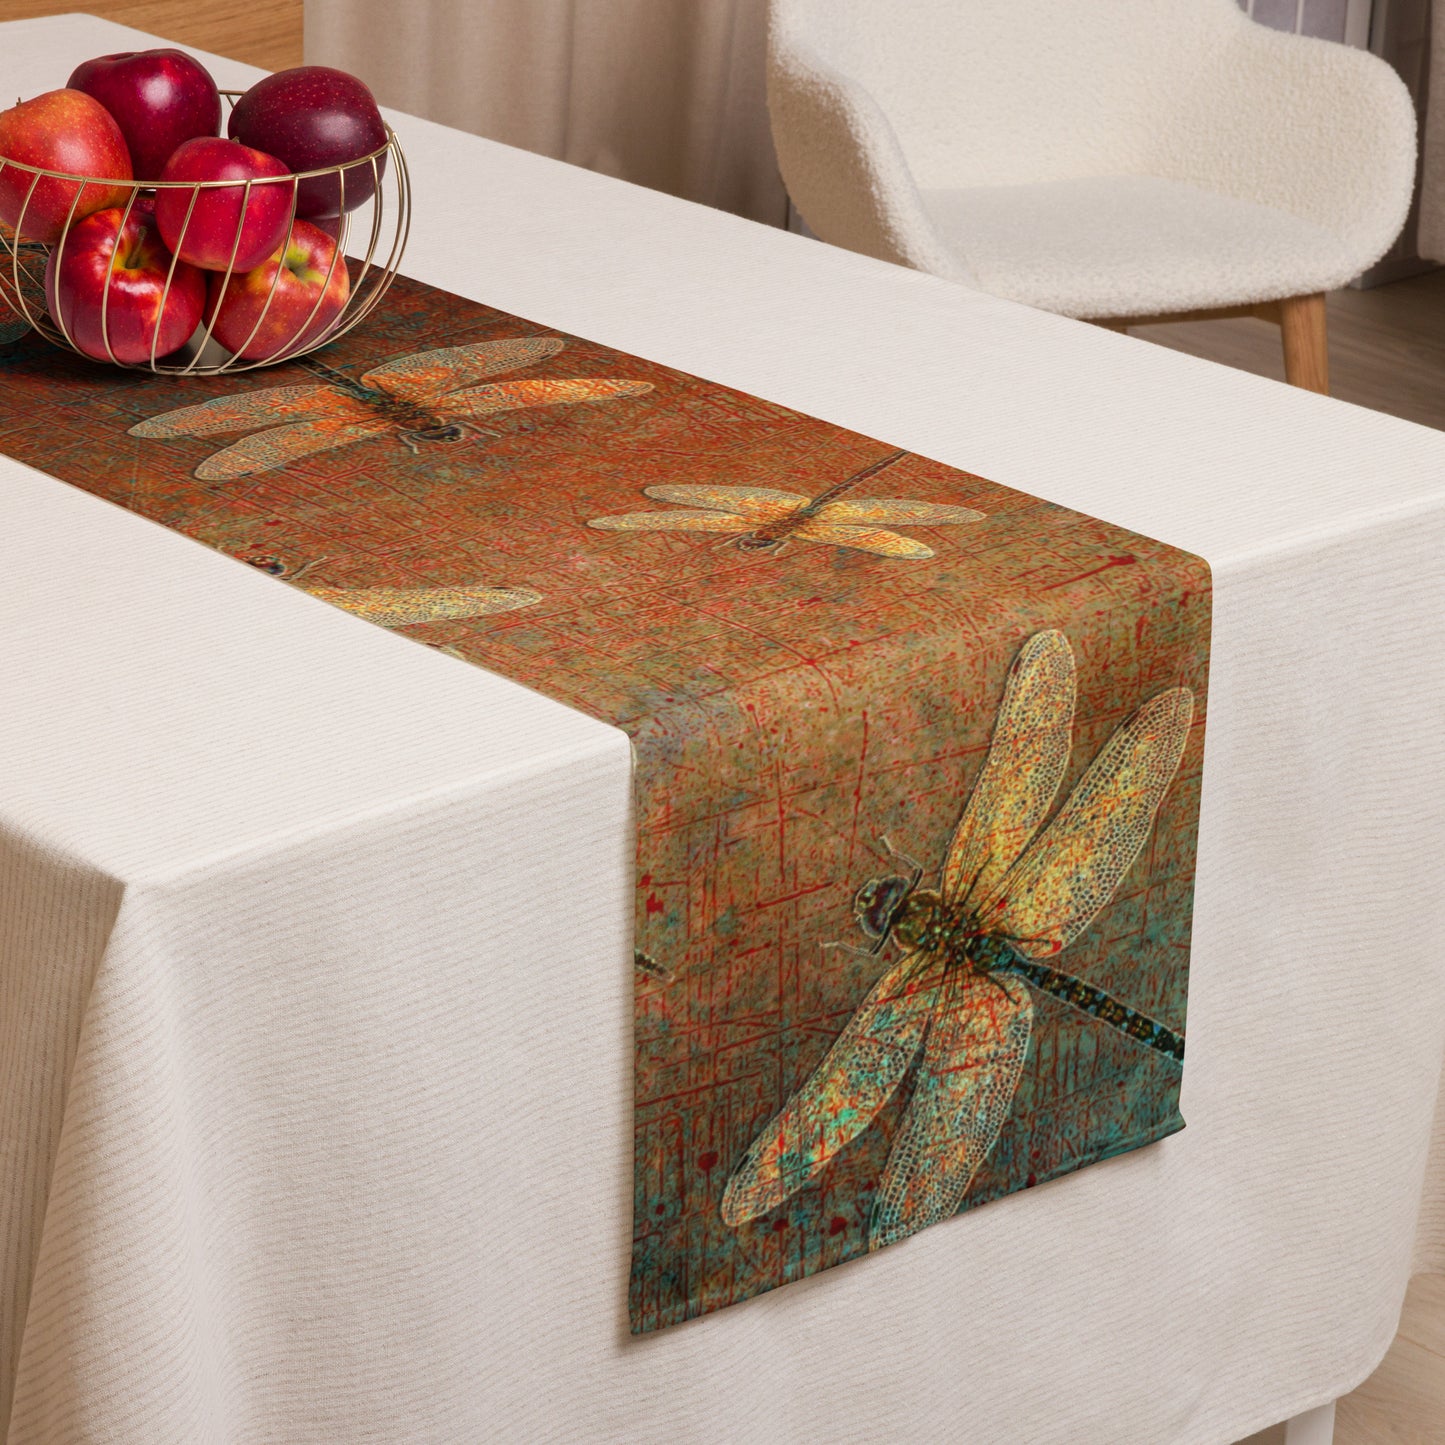 Golden Dragonflies on Orange and Green Background Table runner on table